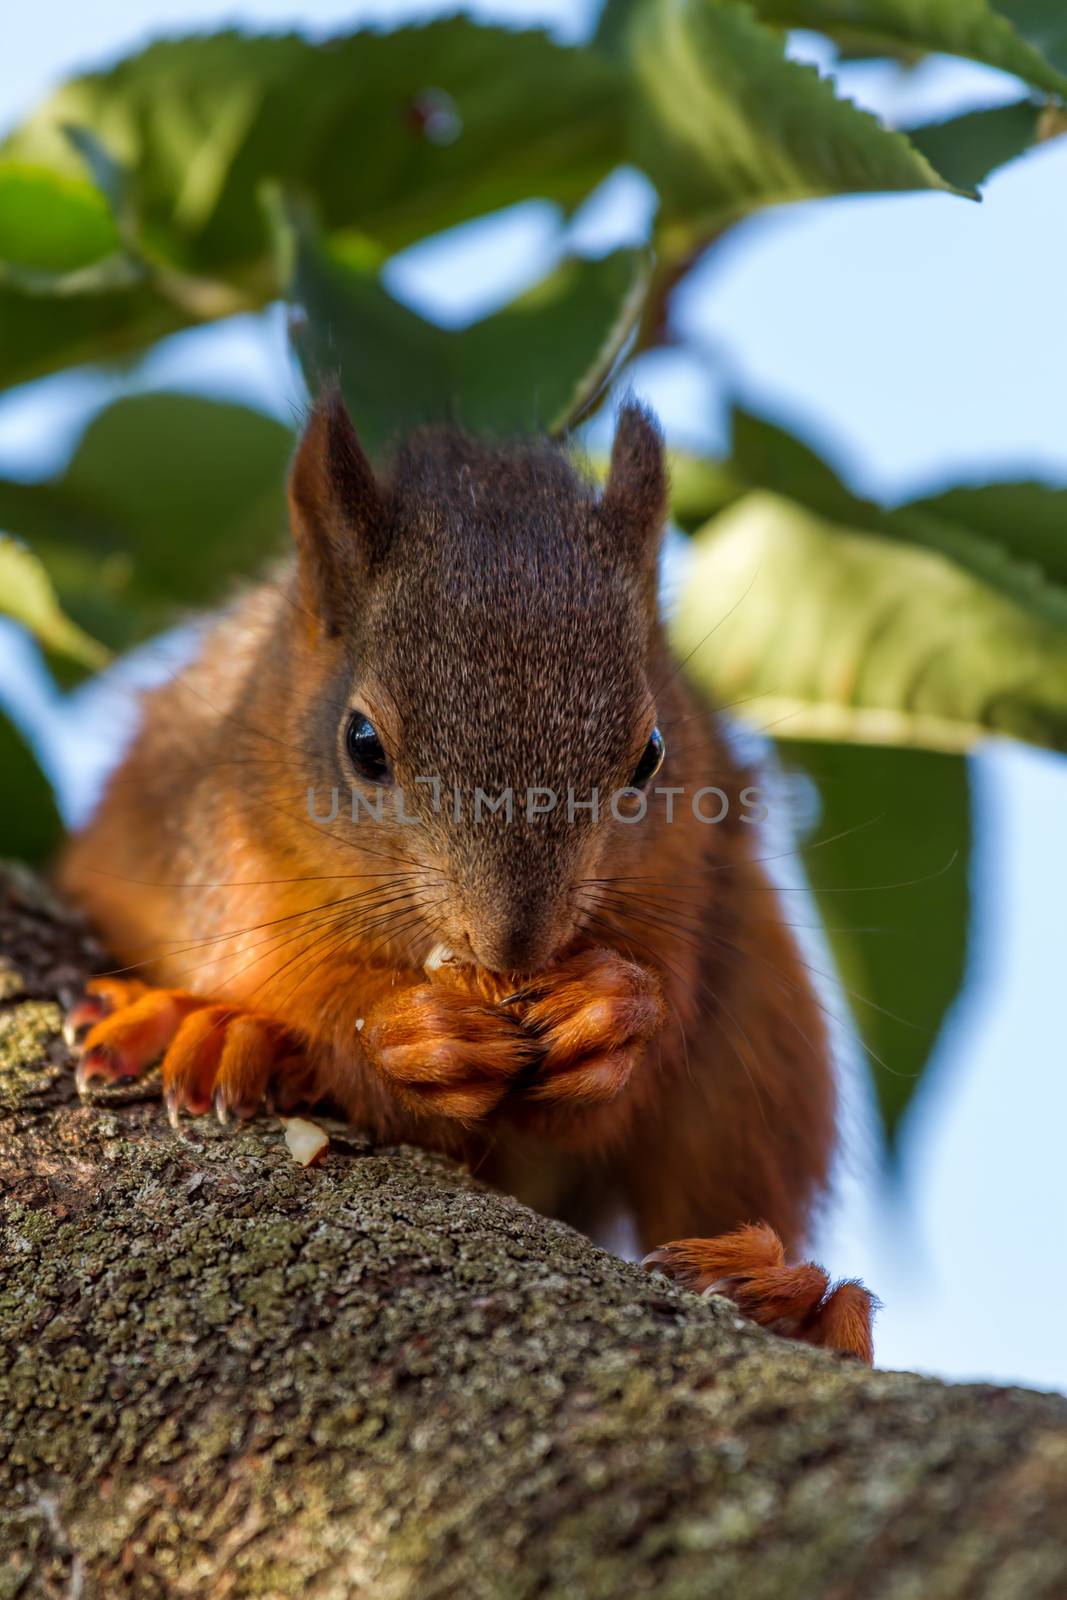 Red squirrel standing on the tree and eating